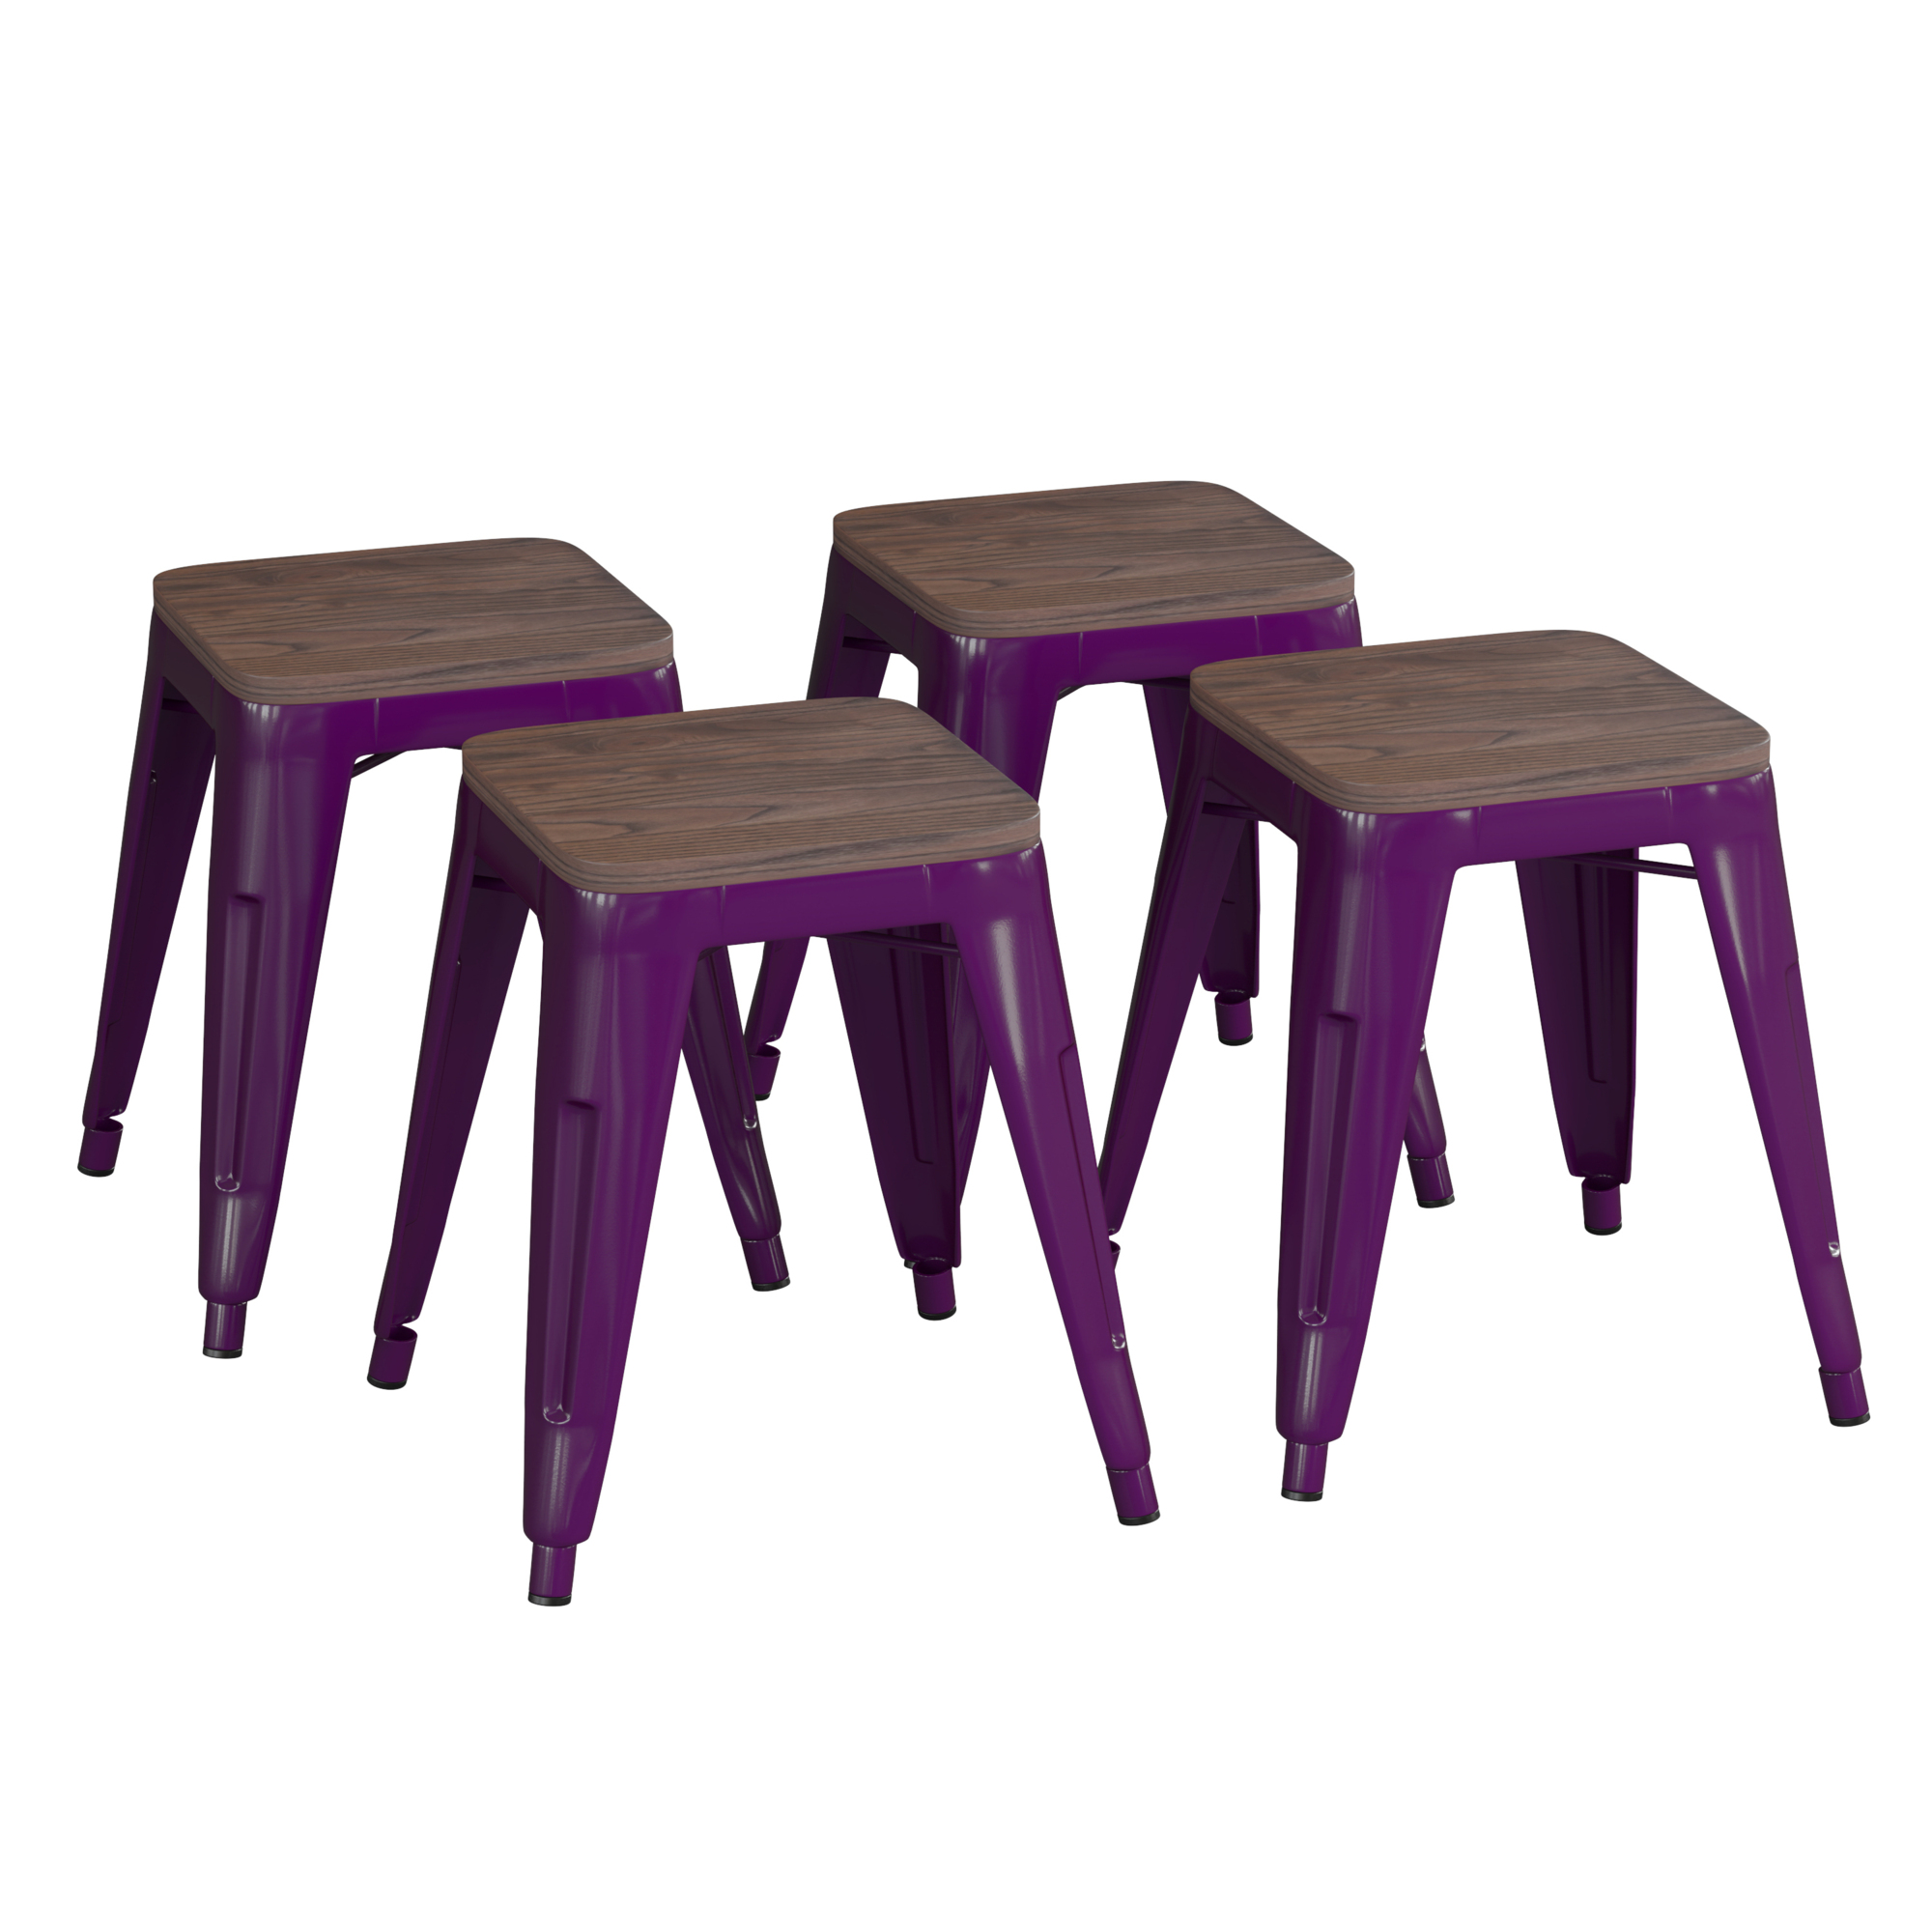 Flash Furniture, 4 Pack 18Inch Purple Metal Stool with Wood Seat, Primary Color Purple, Included (qty.) 4, Model ETBT350318PRWD